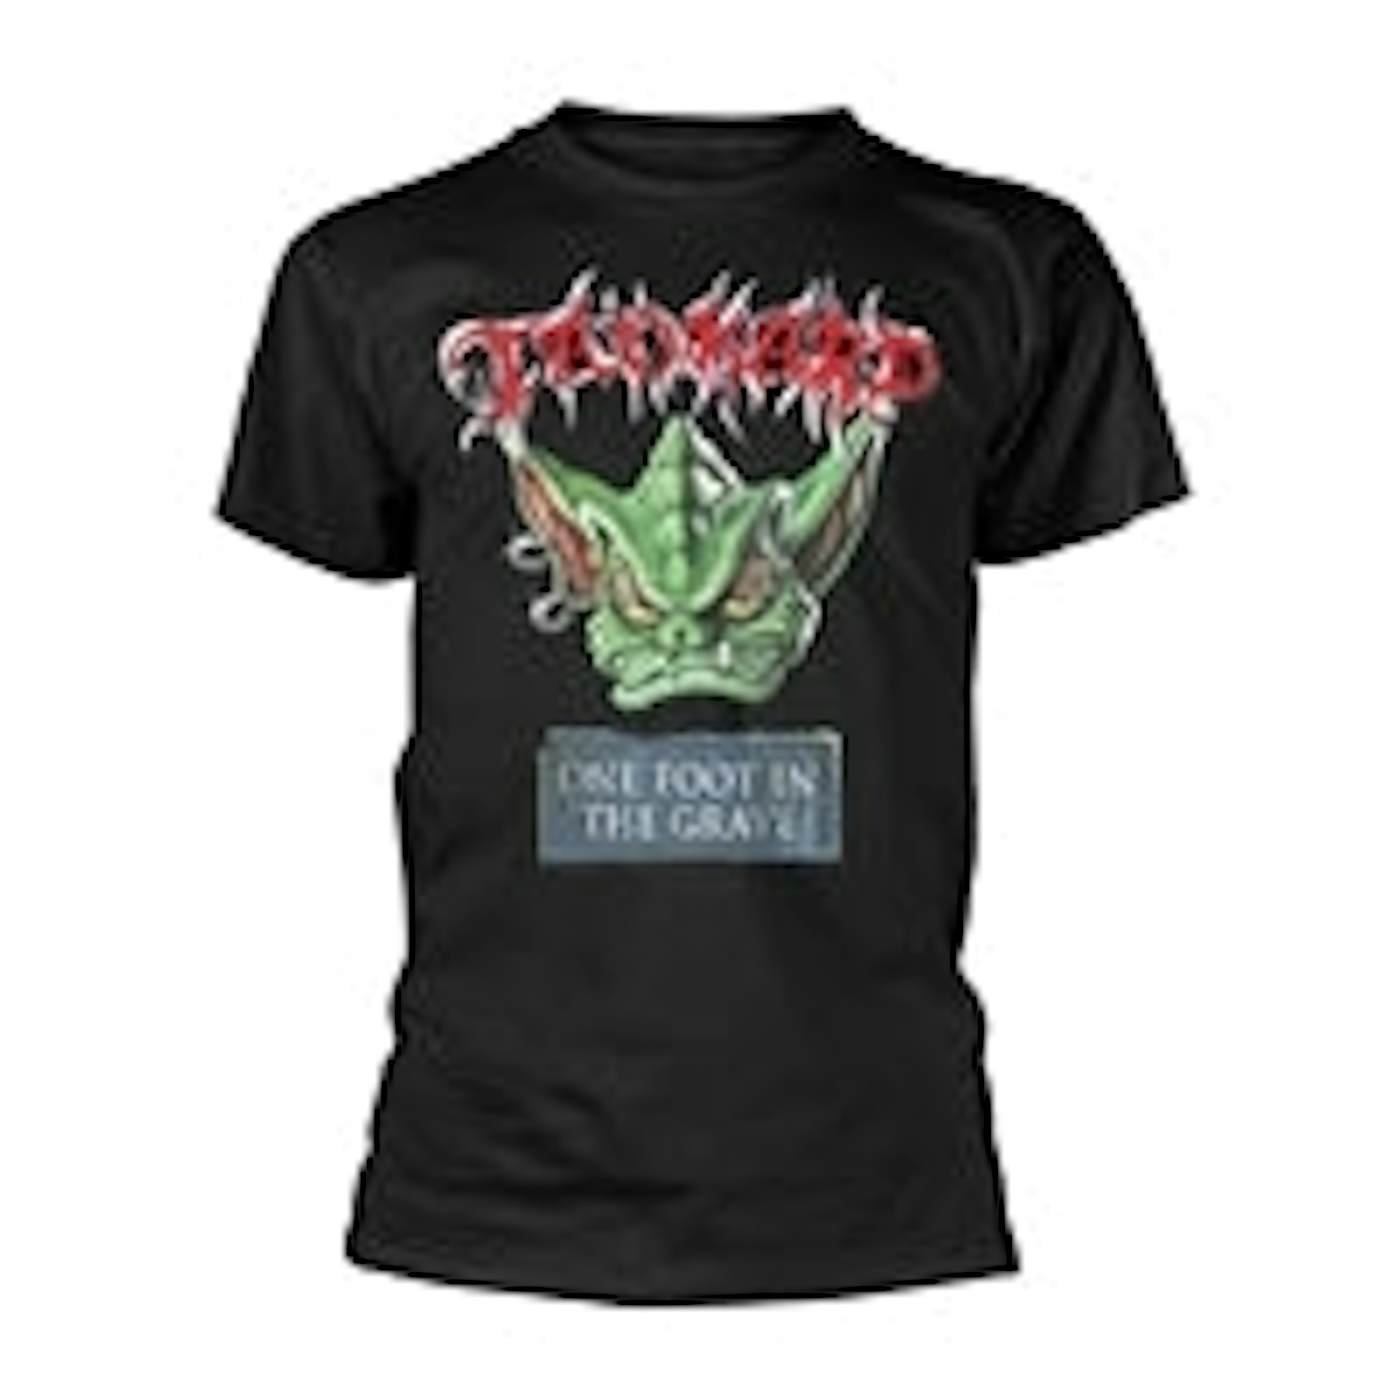 Tankard T Shirt - One Foot In The Grave